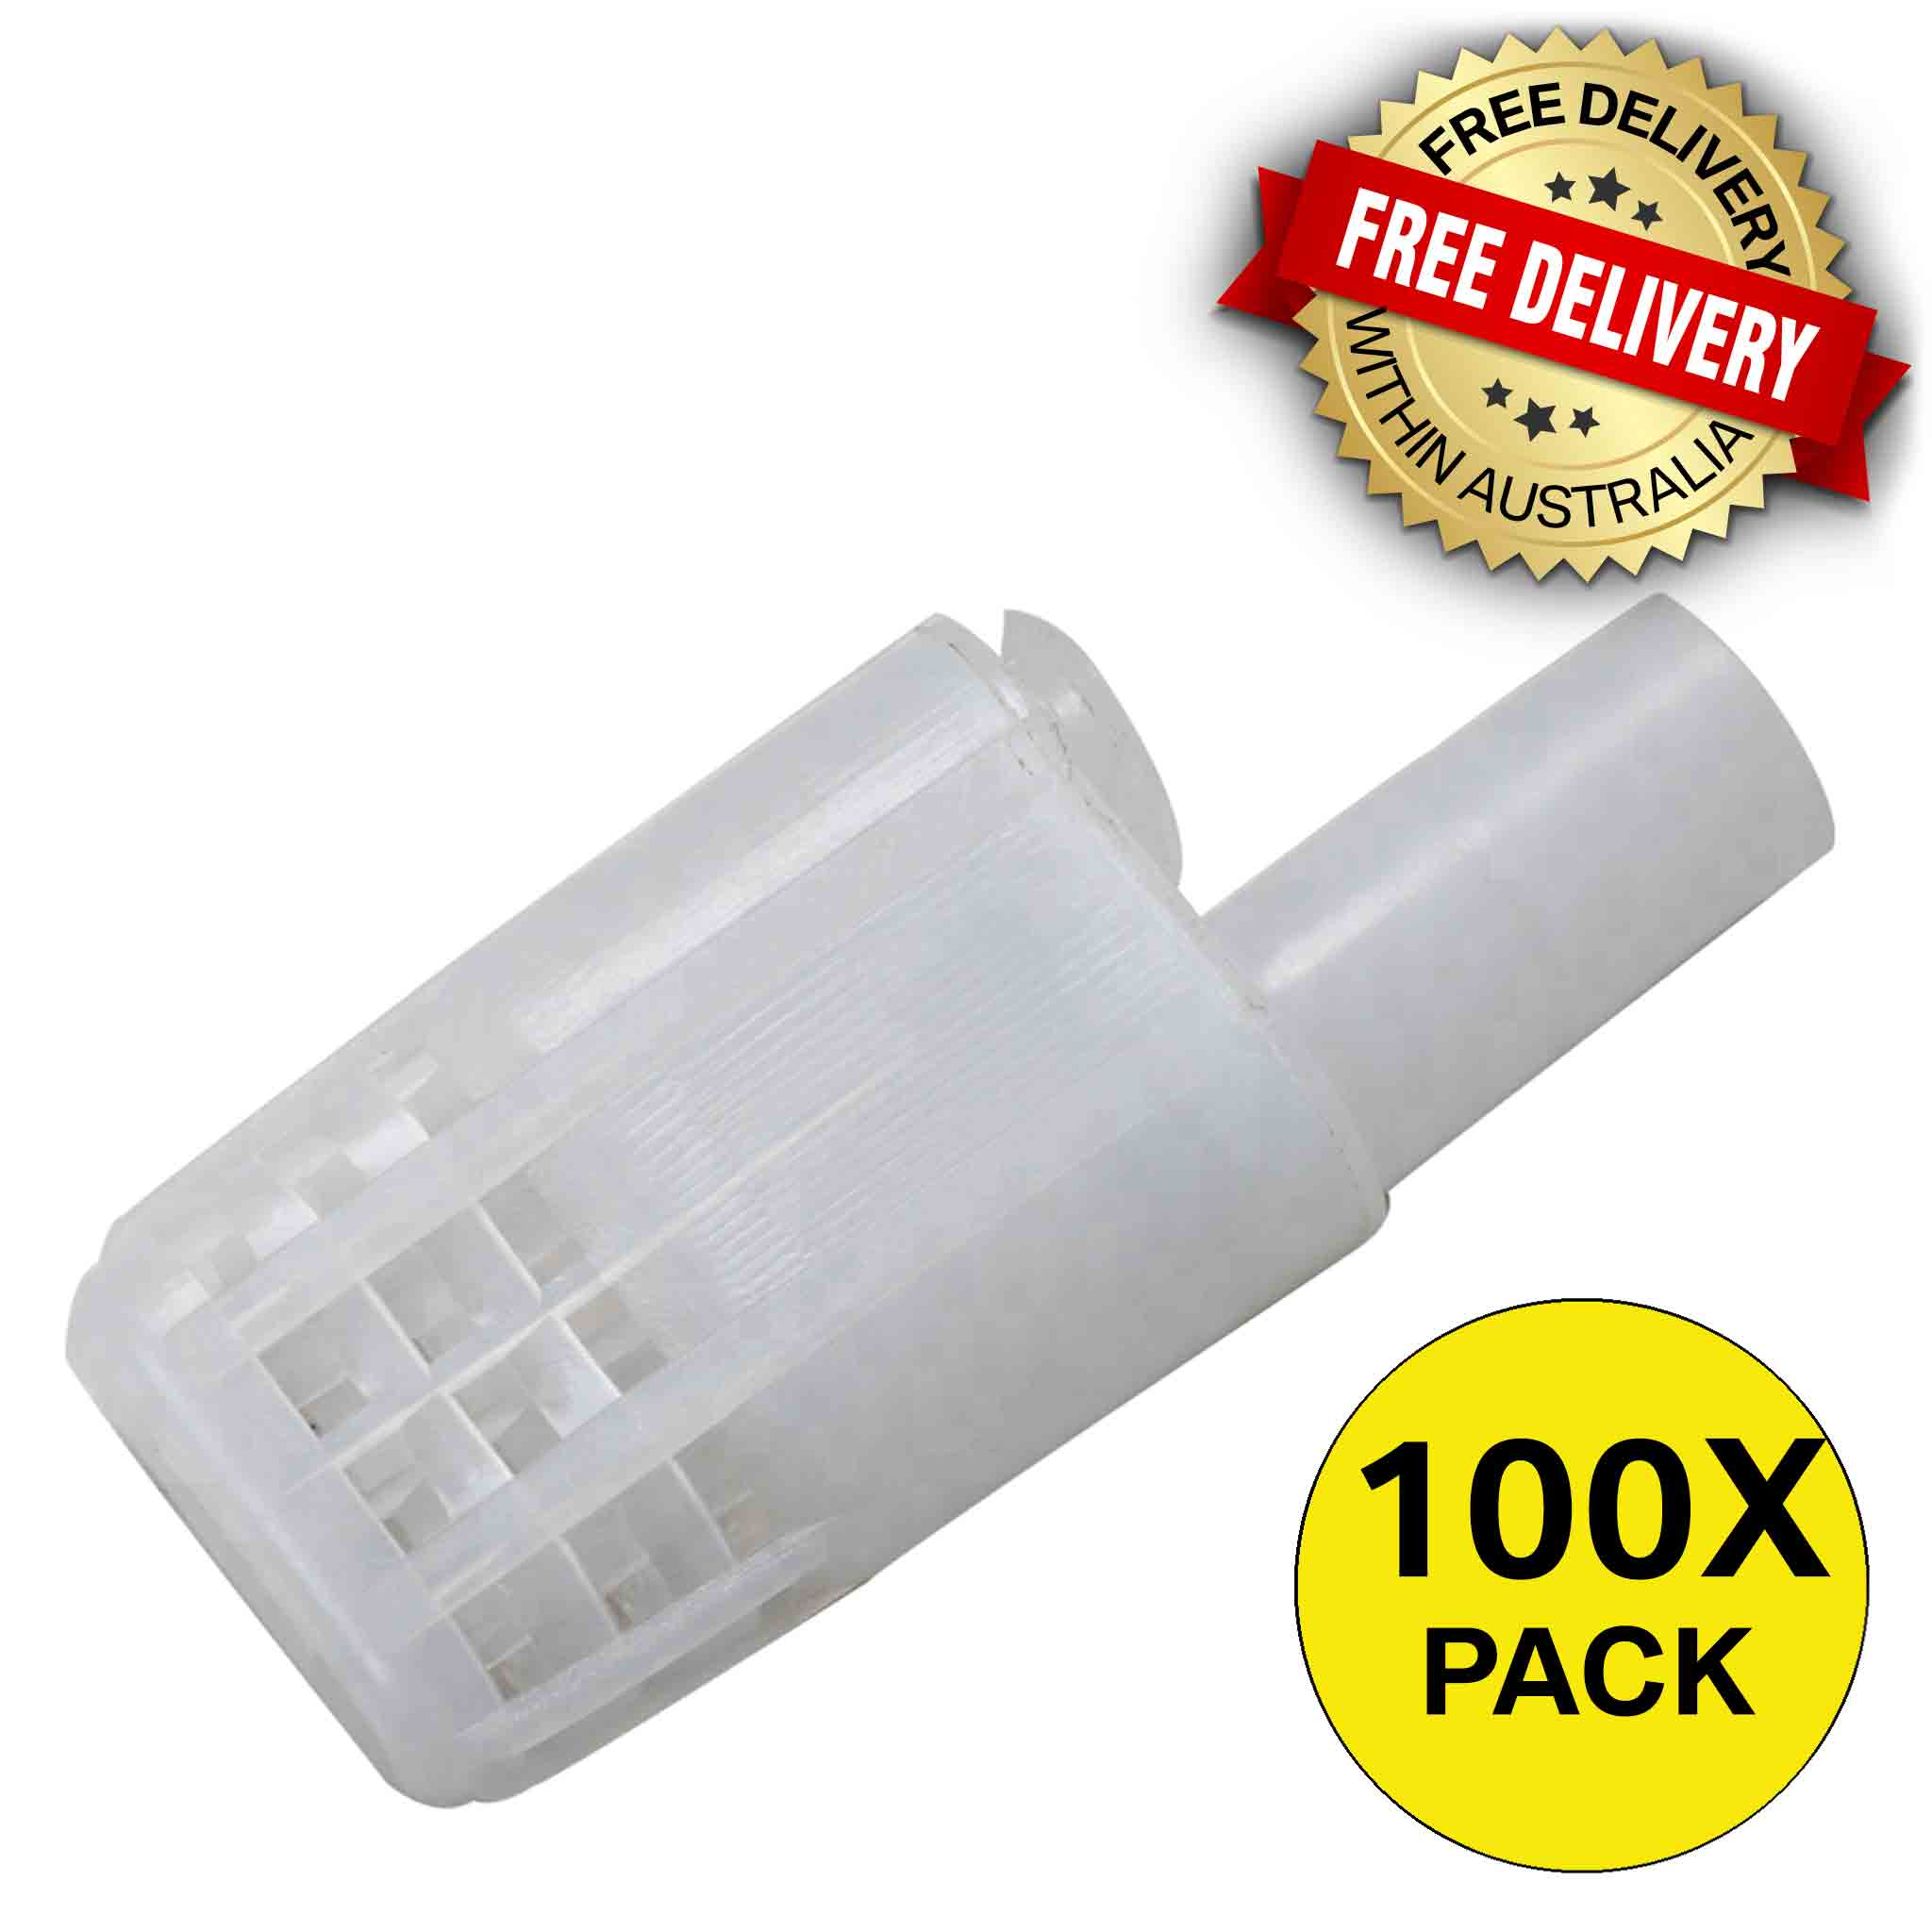 Plastic Queen Cage Large (10, 20, 40, 80 & 100 Pack available) - Queen collection by Buzzbee Beekeeping Supplies